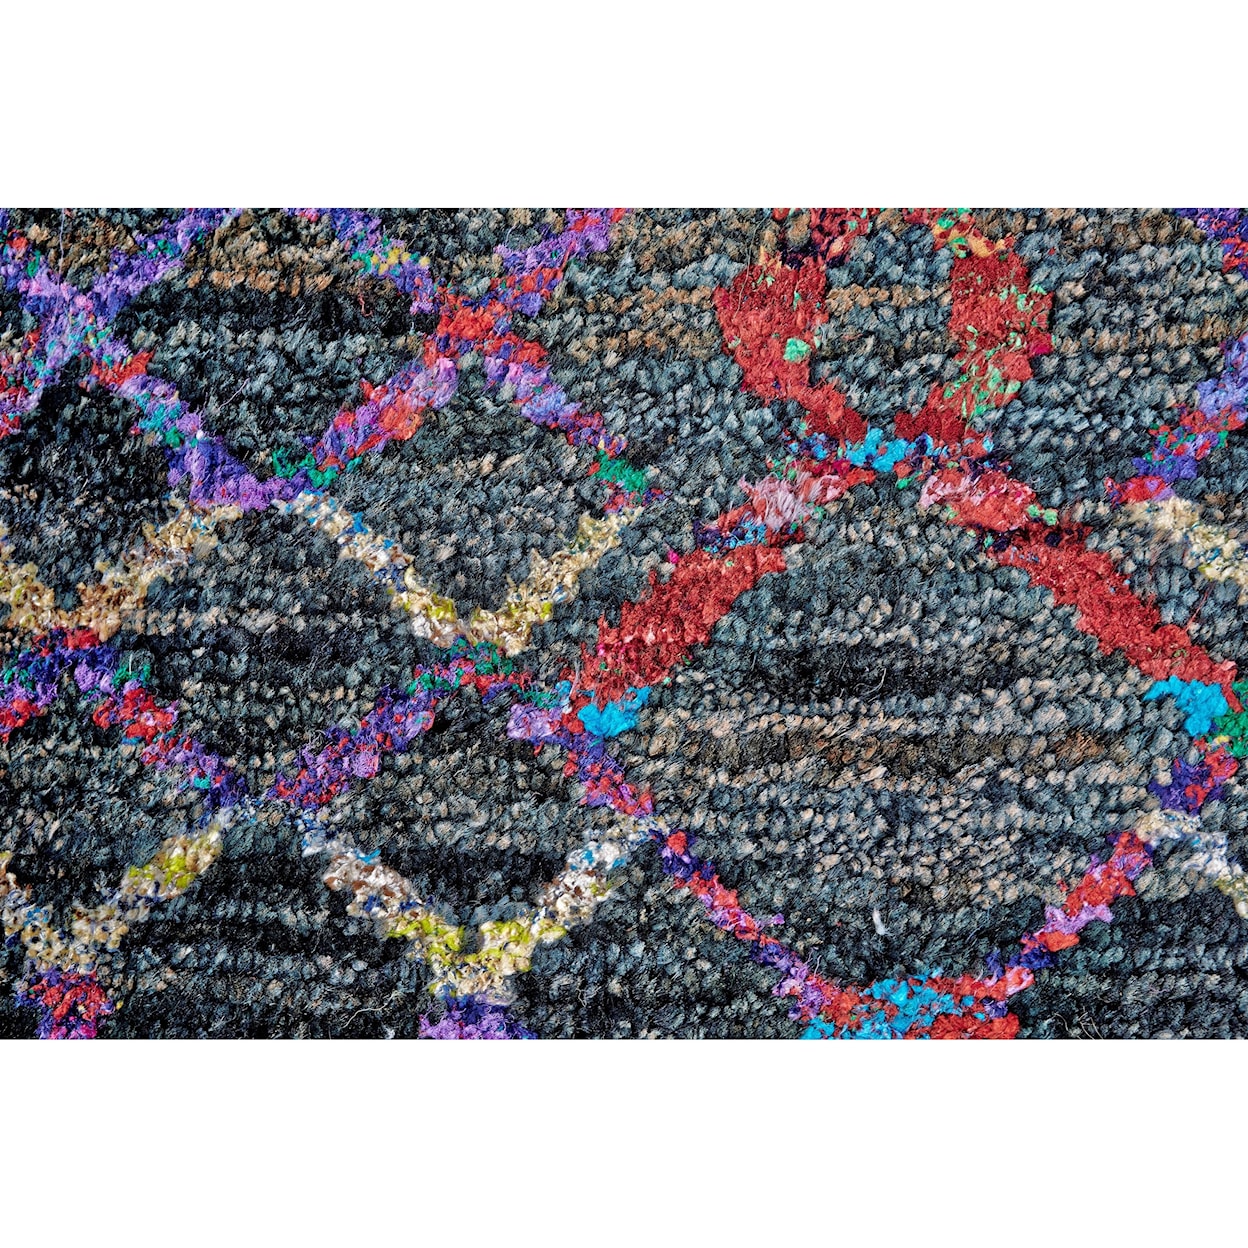 Feizy Rugs Tortola Flame 5'-6" x 8'-6" Area Rug